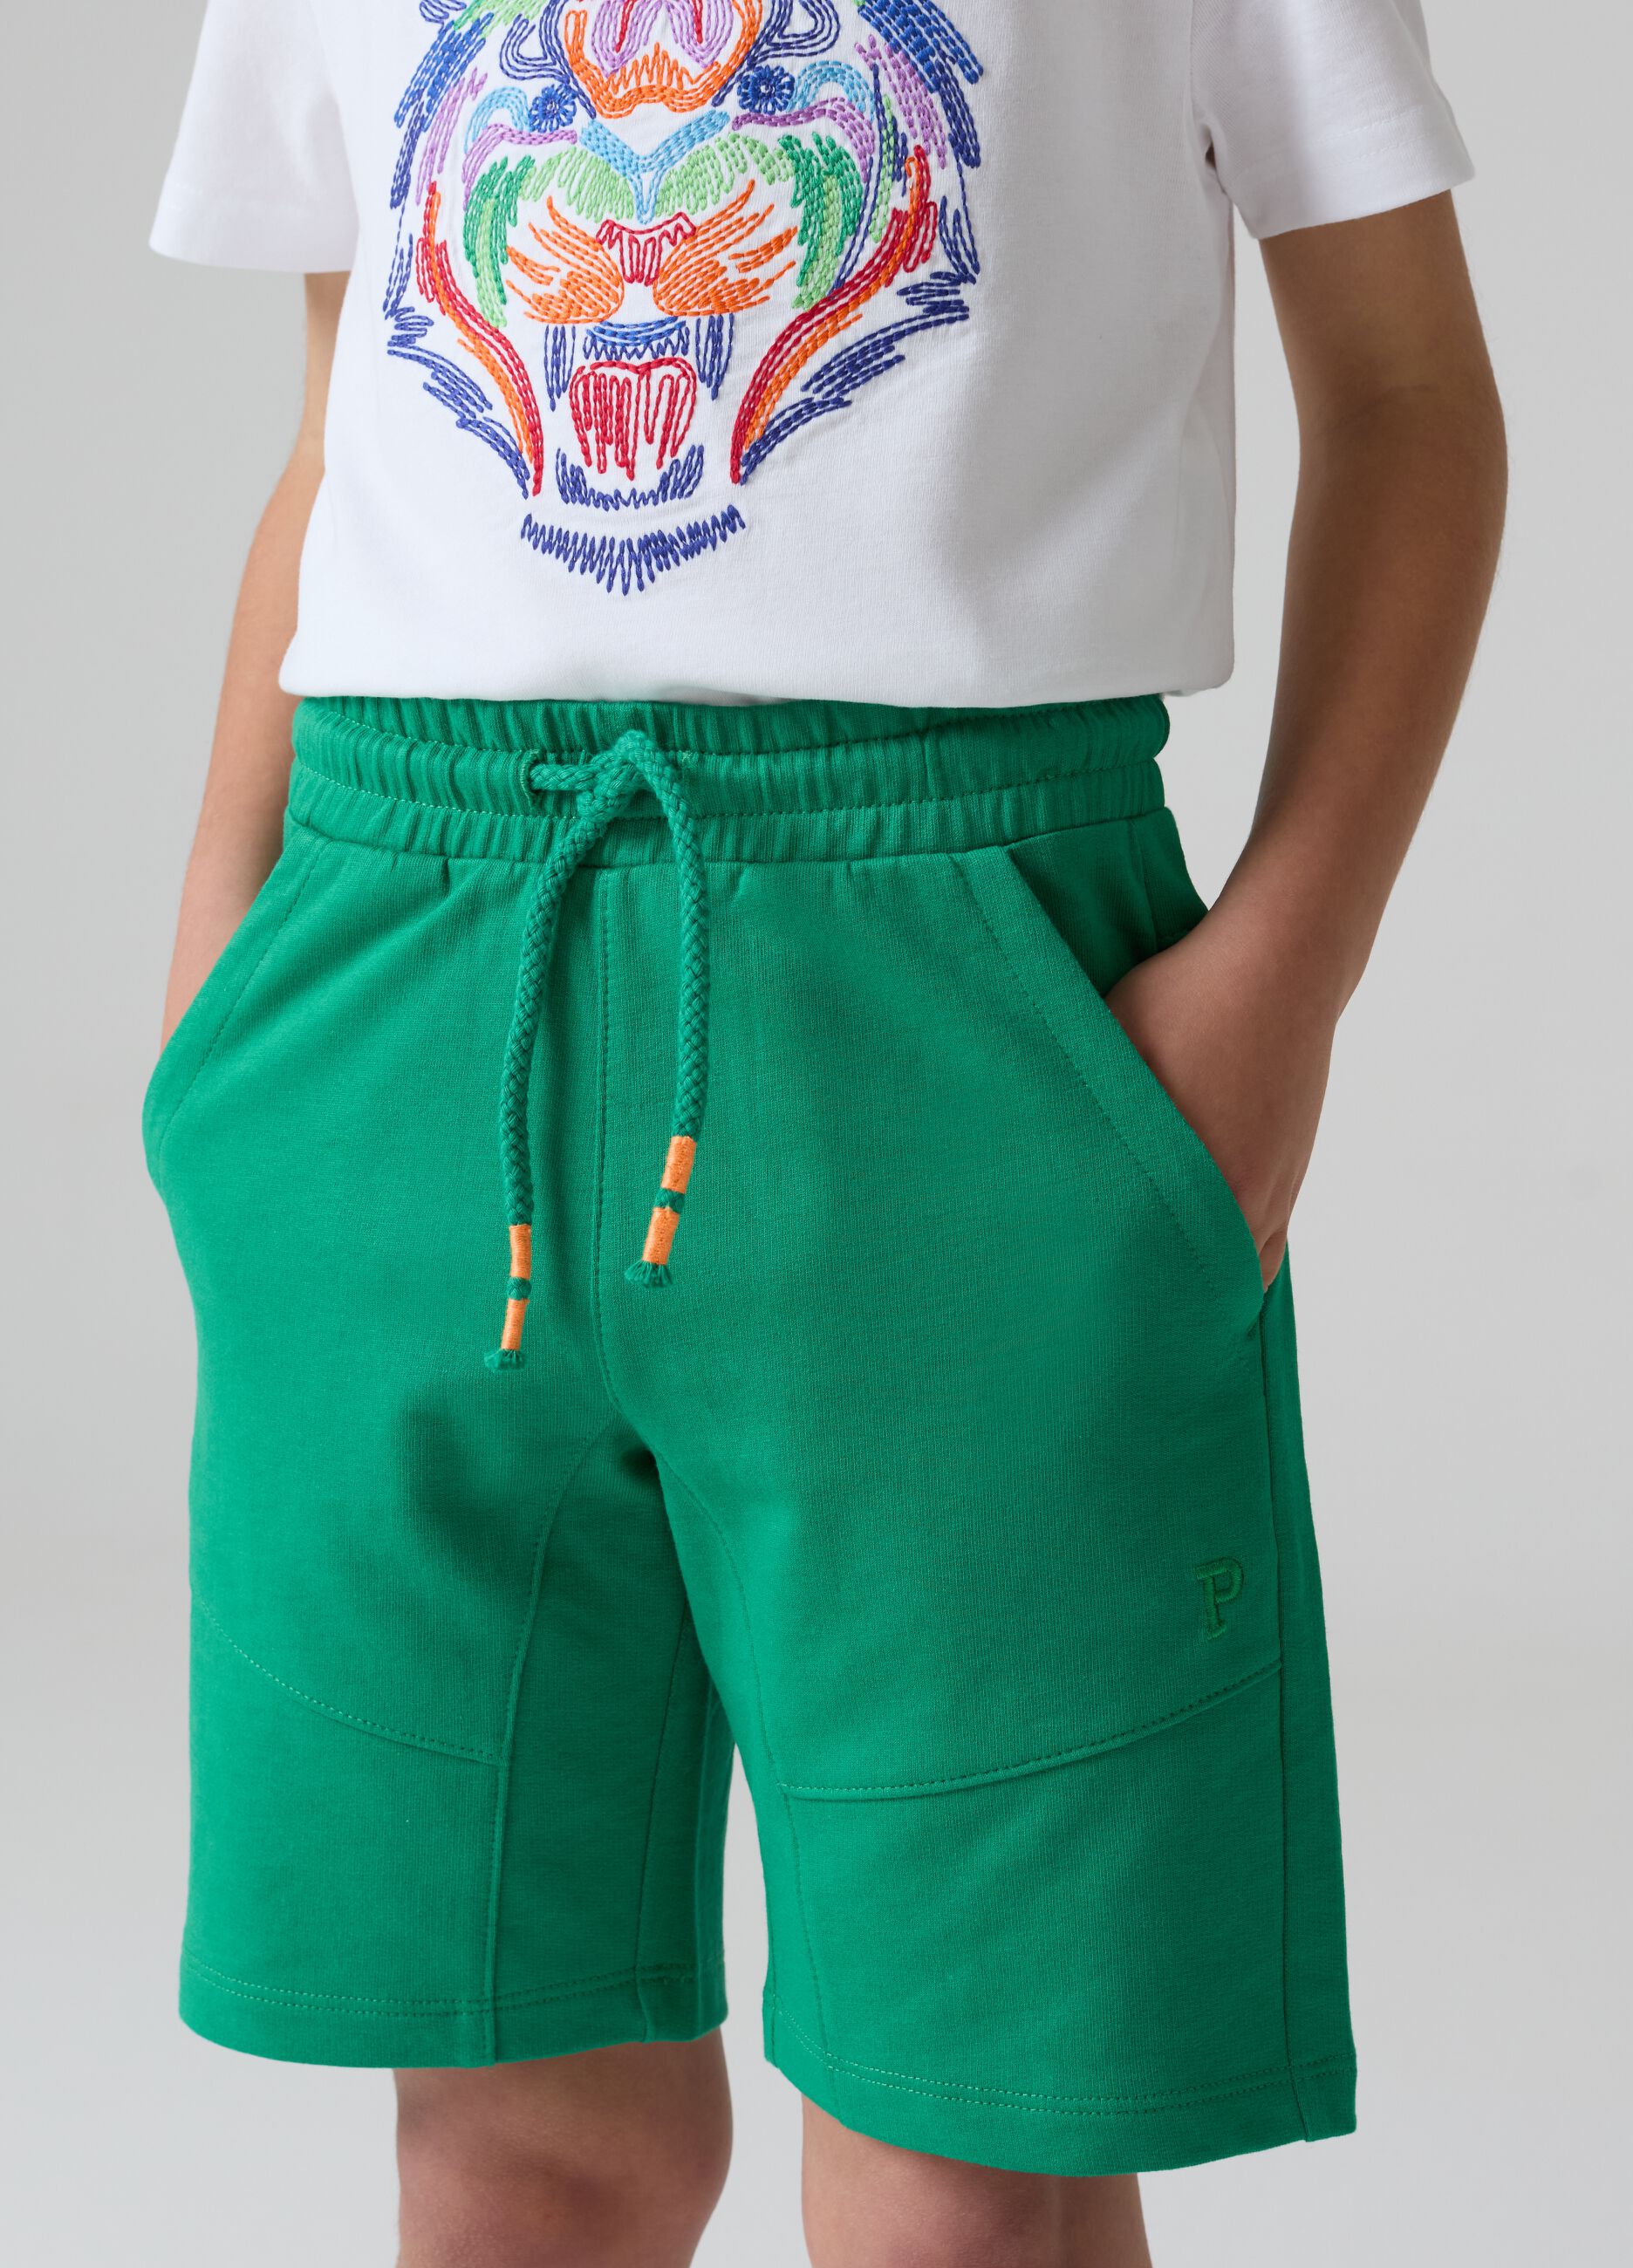 Fleece Bermuda shorts with logo embroidery and drawstring